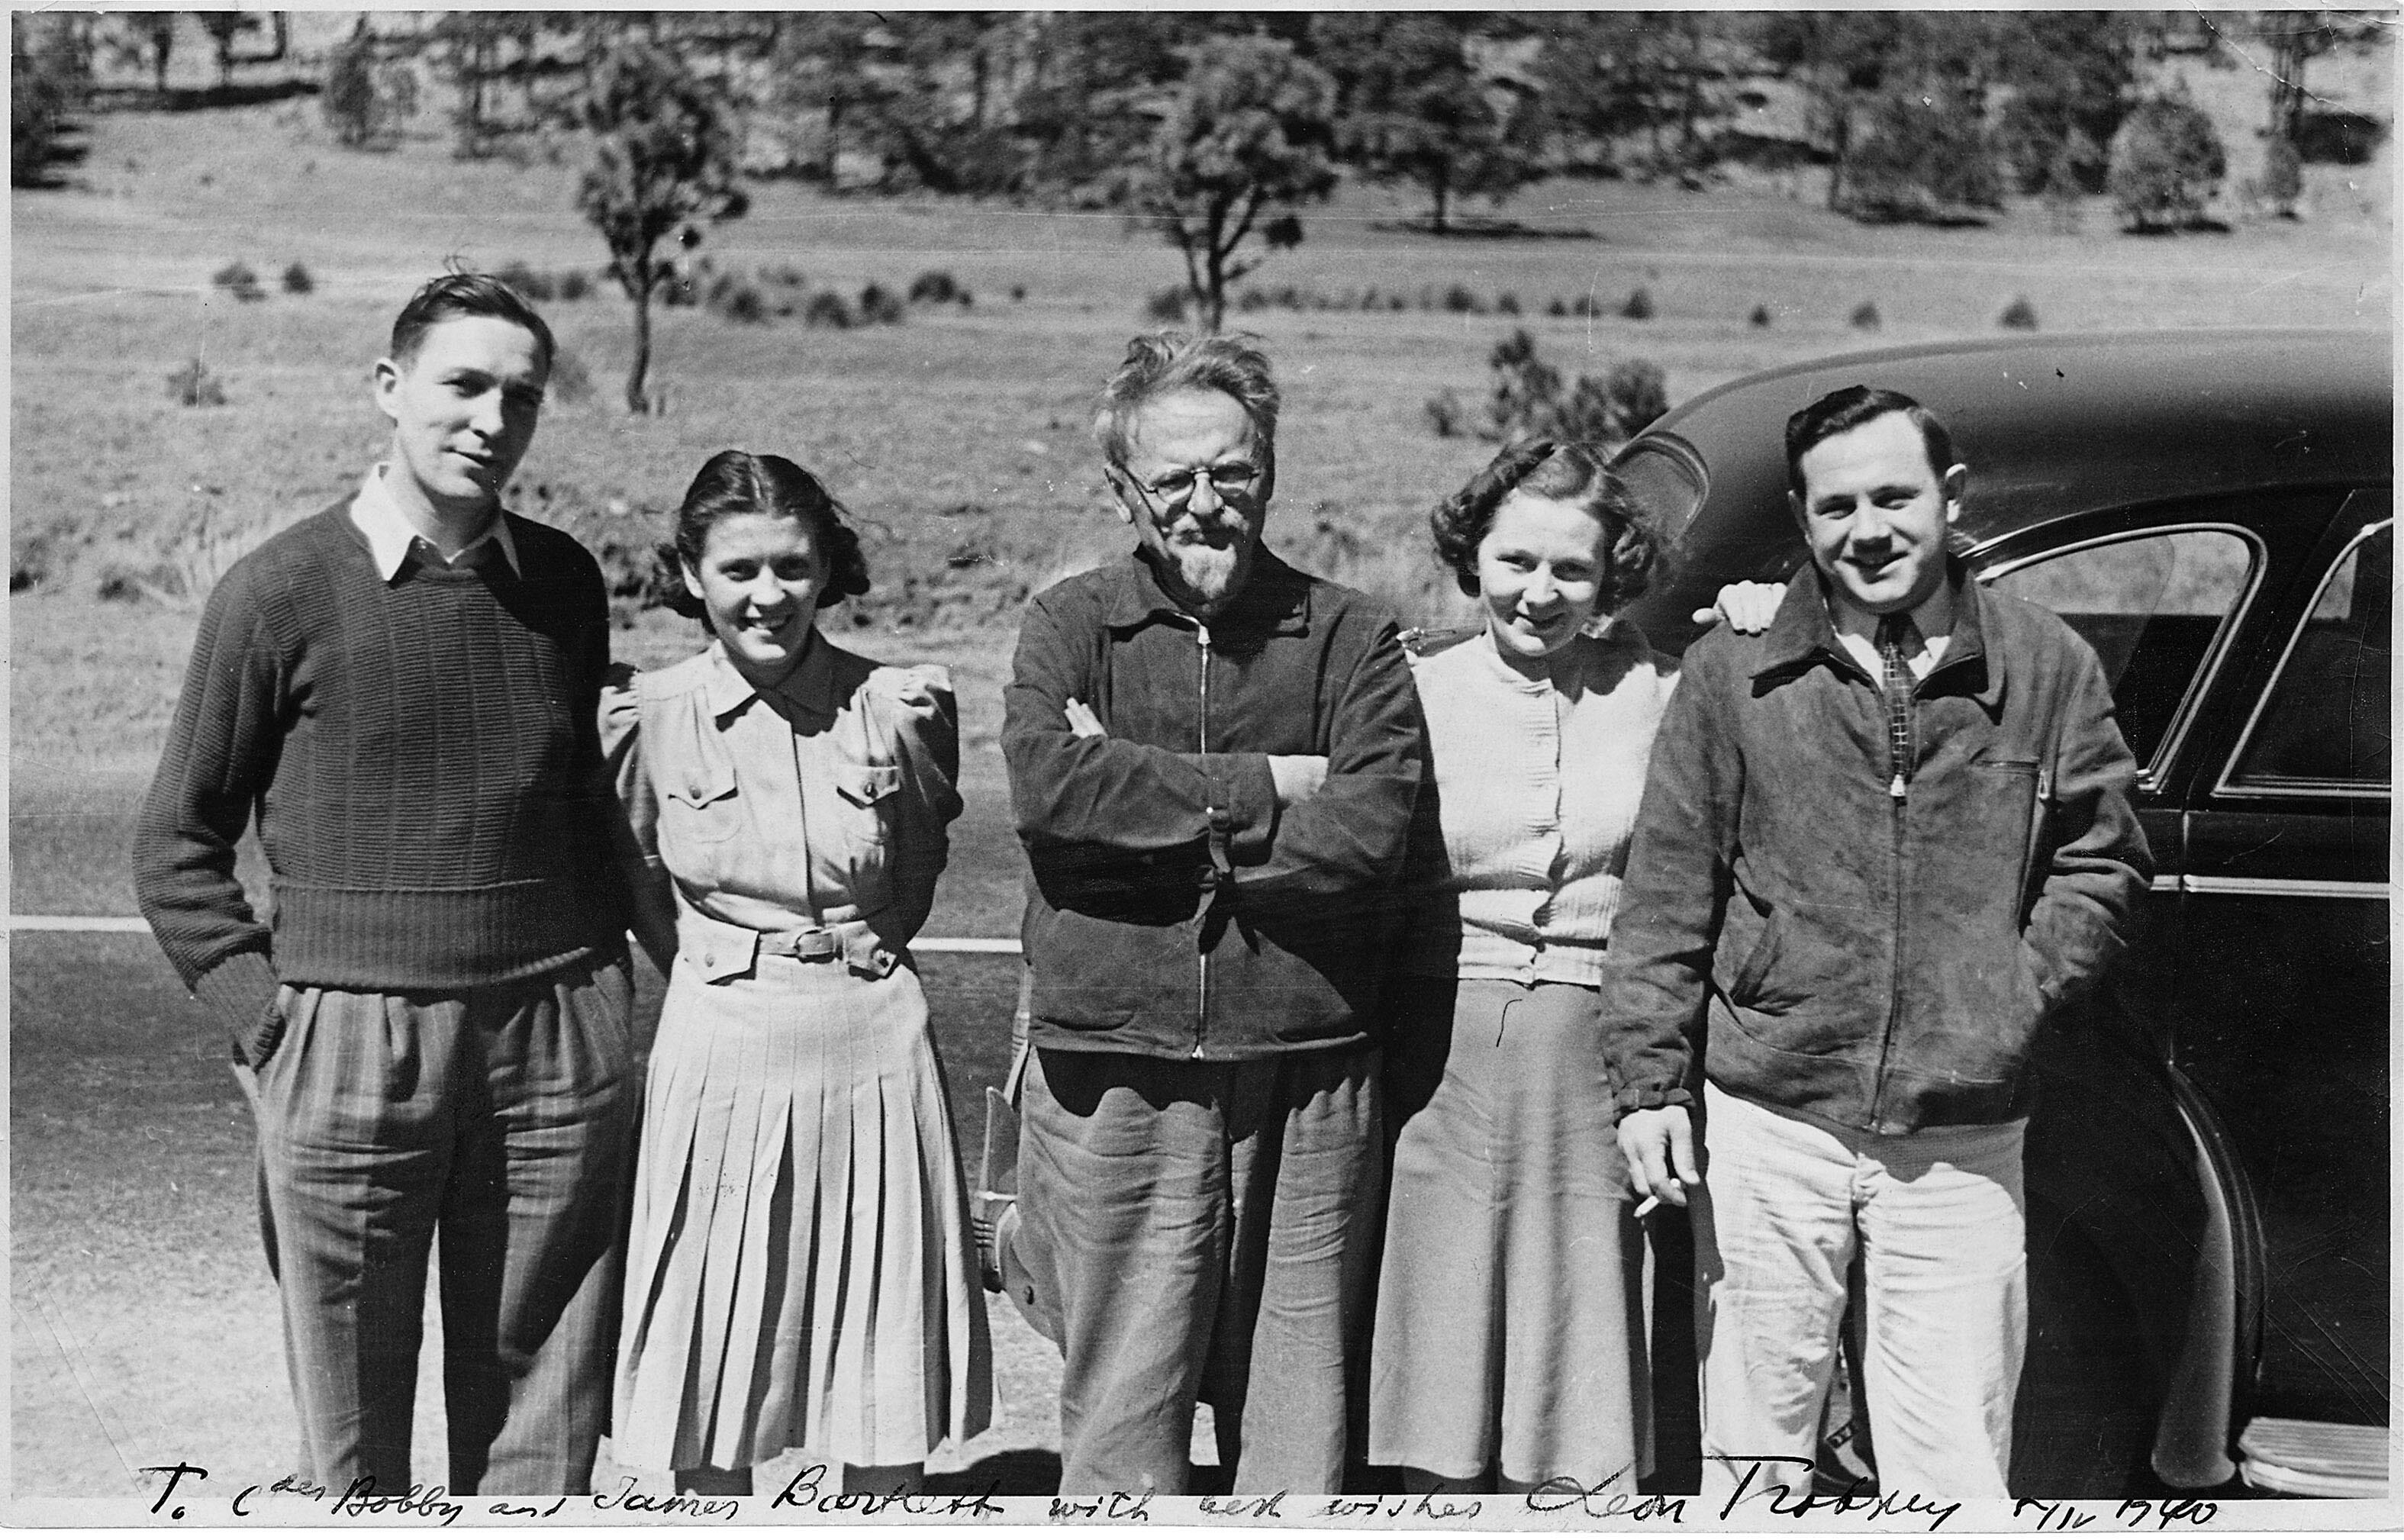 Trotsky poses on the side of a road in front of a car with American Trotskyites, April 1940. (Photo courtesy of The National Archives.)